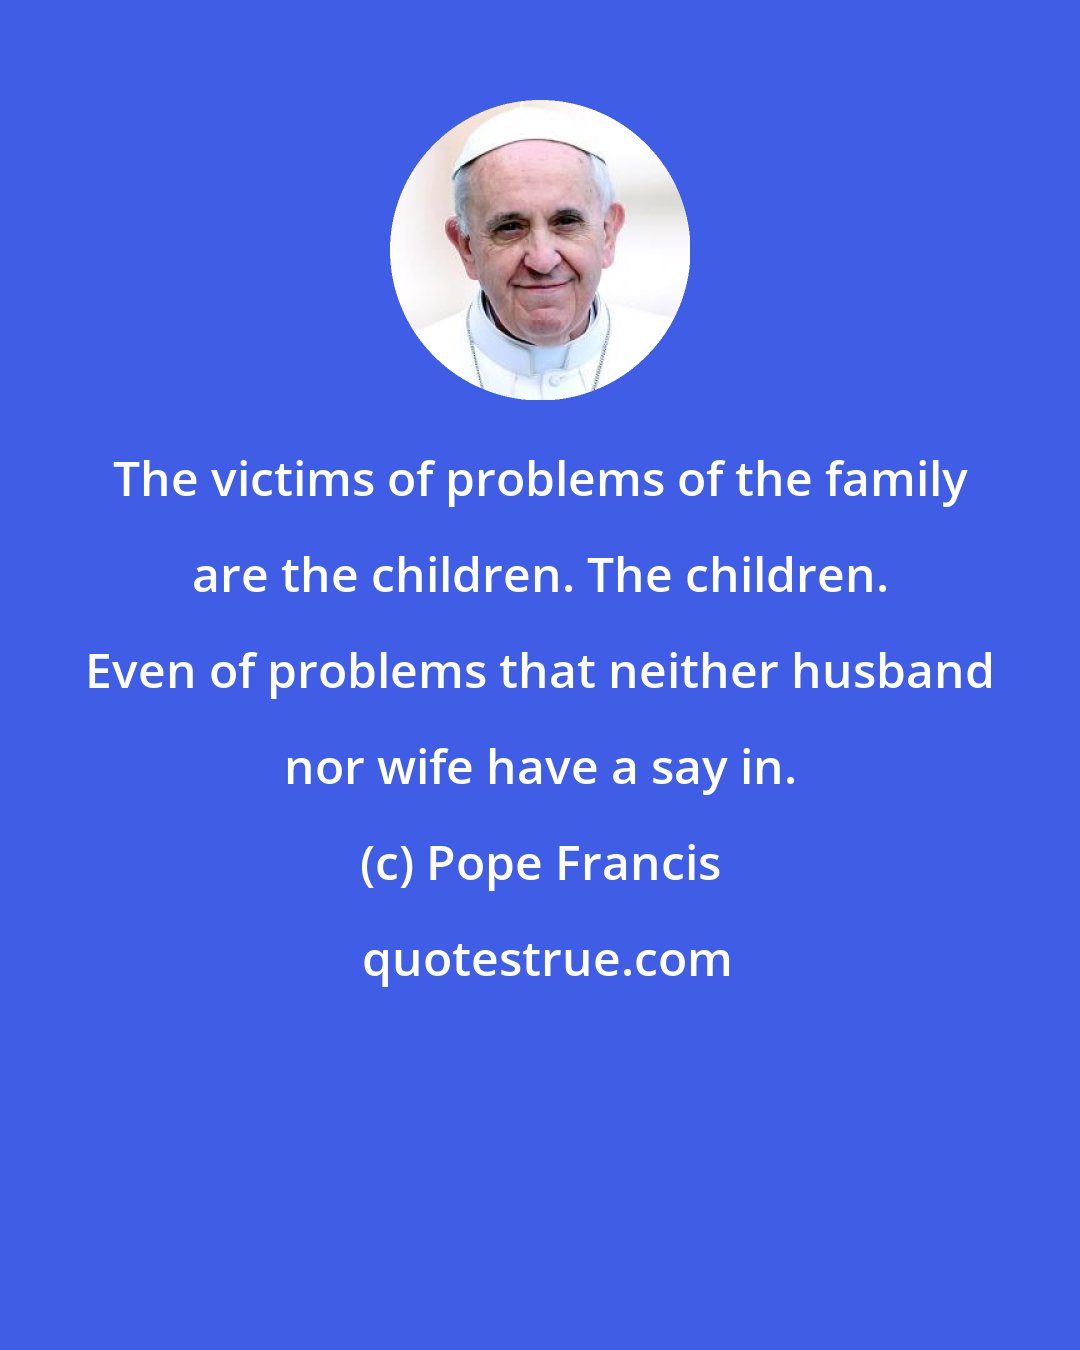 Pope Francis: The victims of problems of the family are the children. The children. Even of problems that neither husband nor wife have a say in.